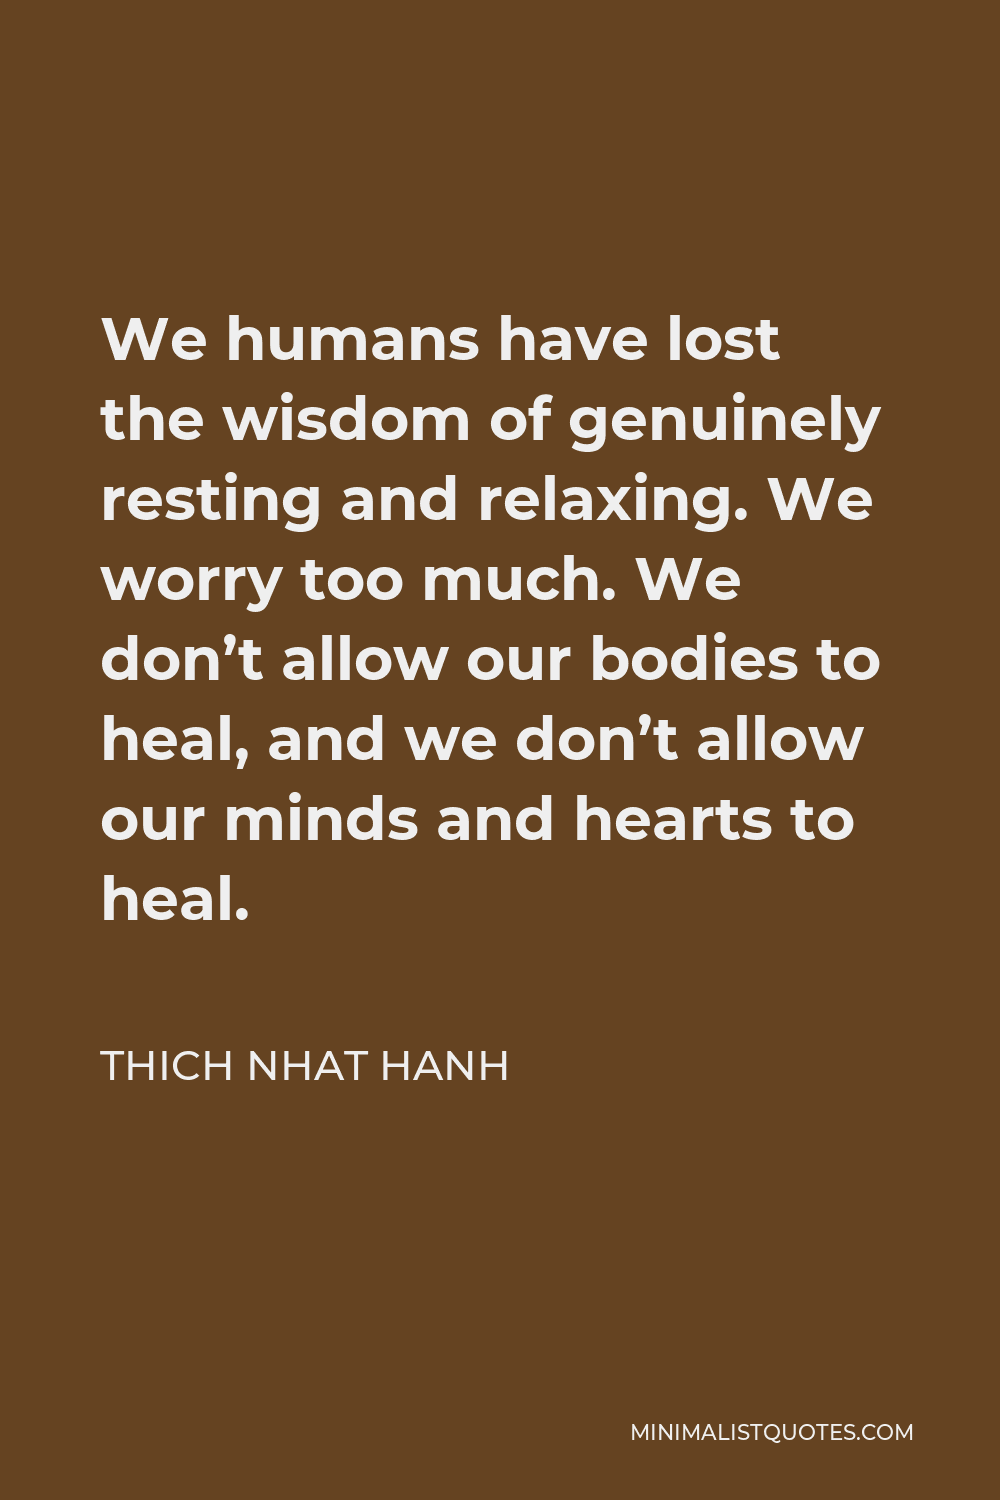 Thich Nhat Hanh Quote - We humans have lost the wisdom of genuinely resting and relaxing. We worry too much. We don’t allow our bodies to heal, and we don’t allow our minds and hearts to heal.